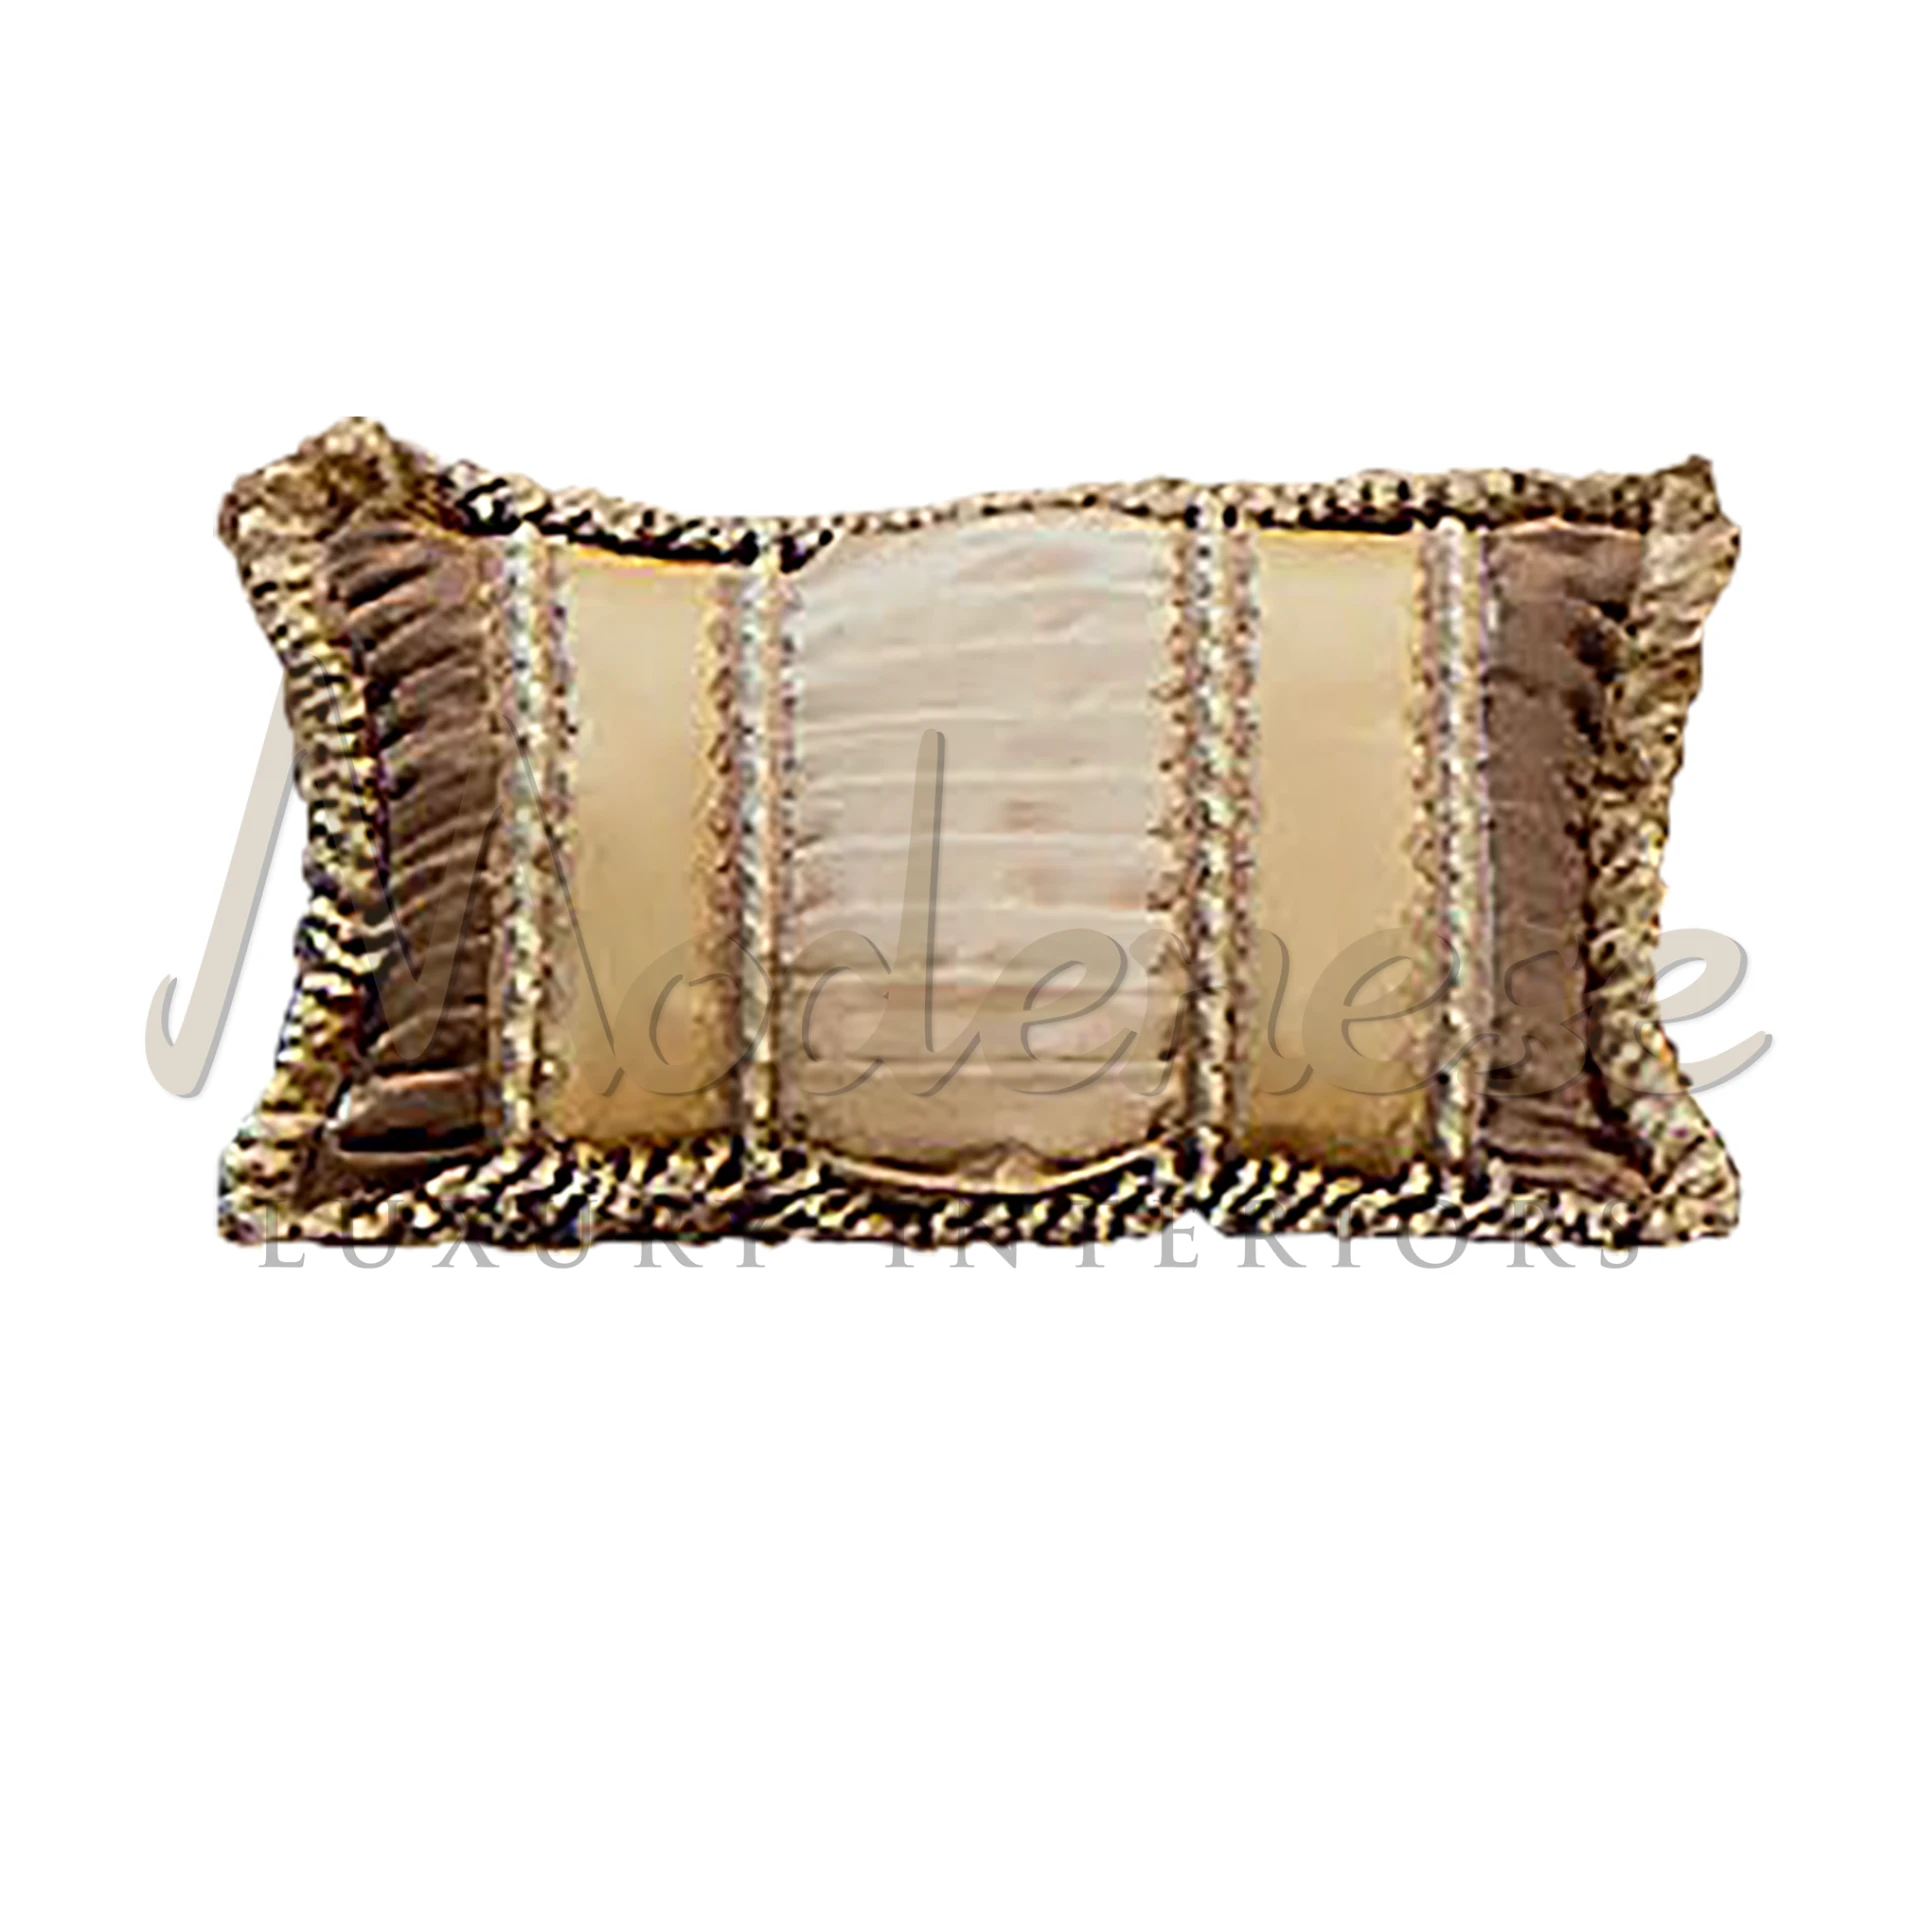 Royal Designer Pillow with plush filling, offering a soft and inviting feel, crafted from high-quality materials for luxury comfort